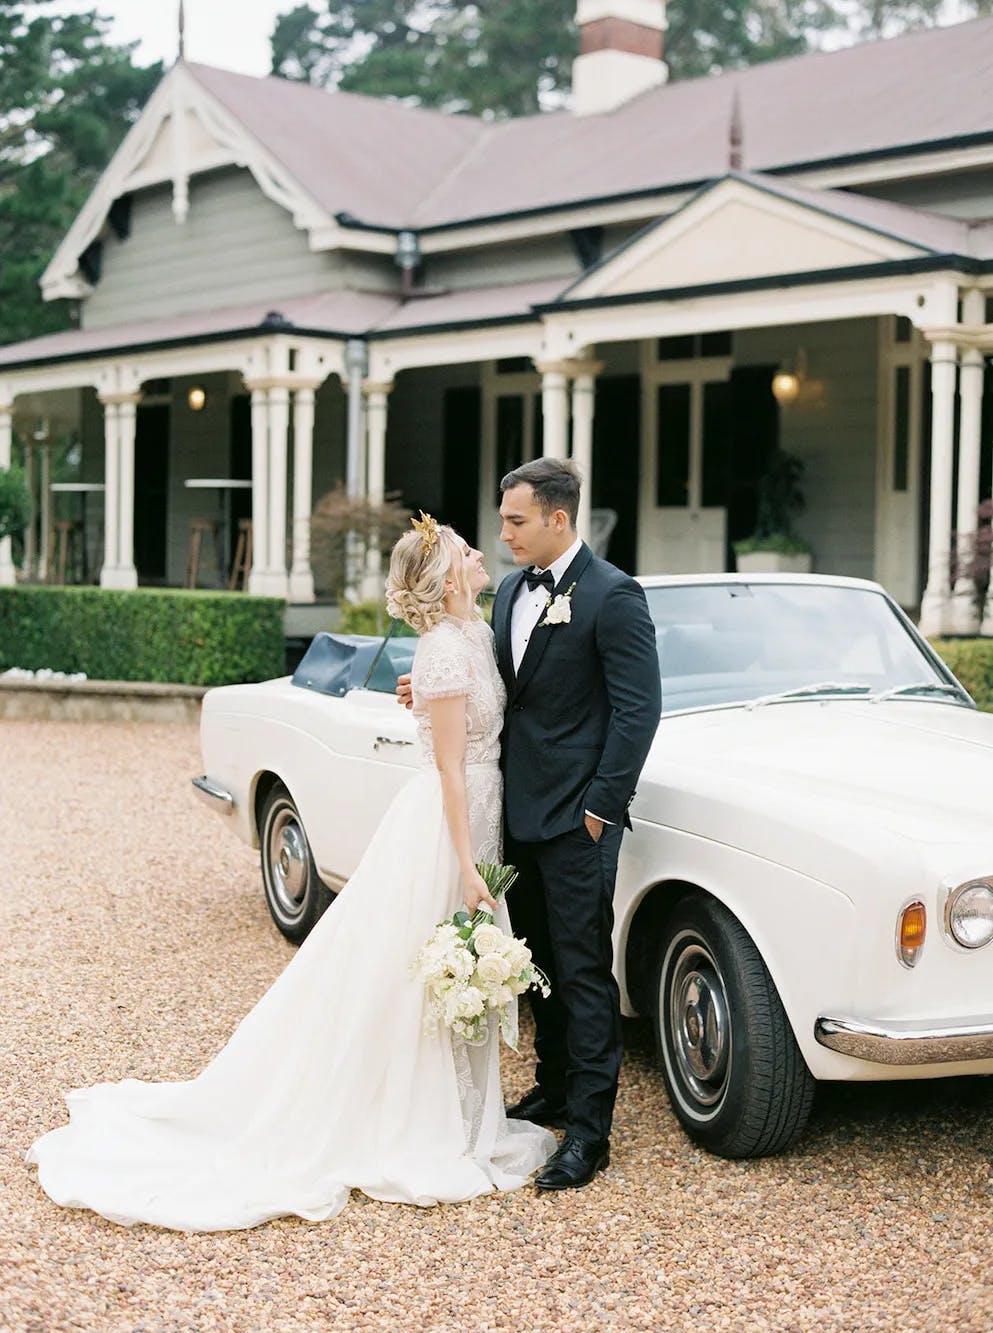 A bride and groom, dressed in a white gown and black suit respectively, stand next to a vintage white convertible car. The bride holds a bouquet of white flowers. They are positioned in front of a large, elegant house with a porch and peaked roofs.